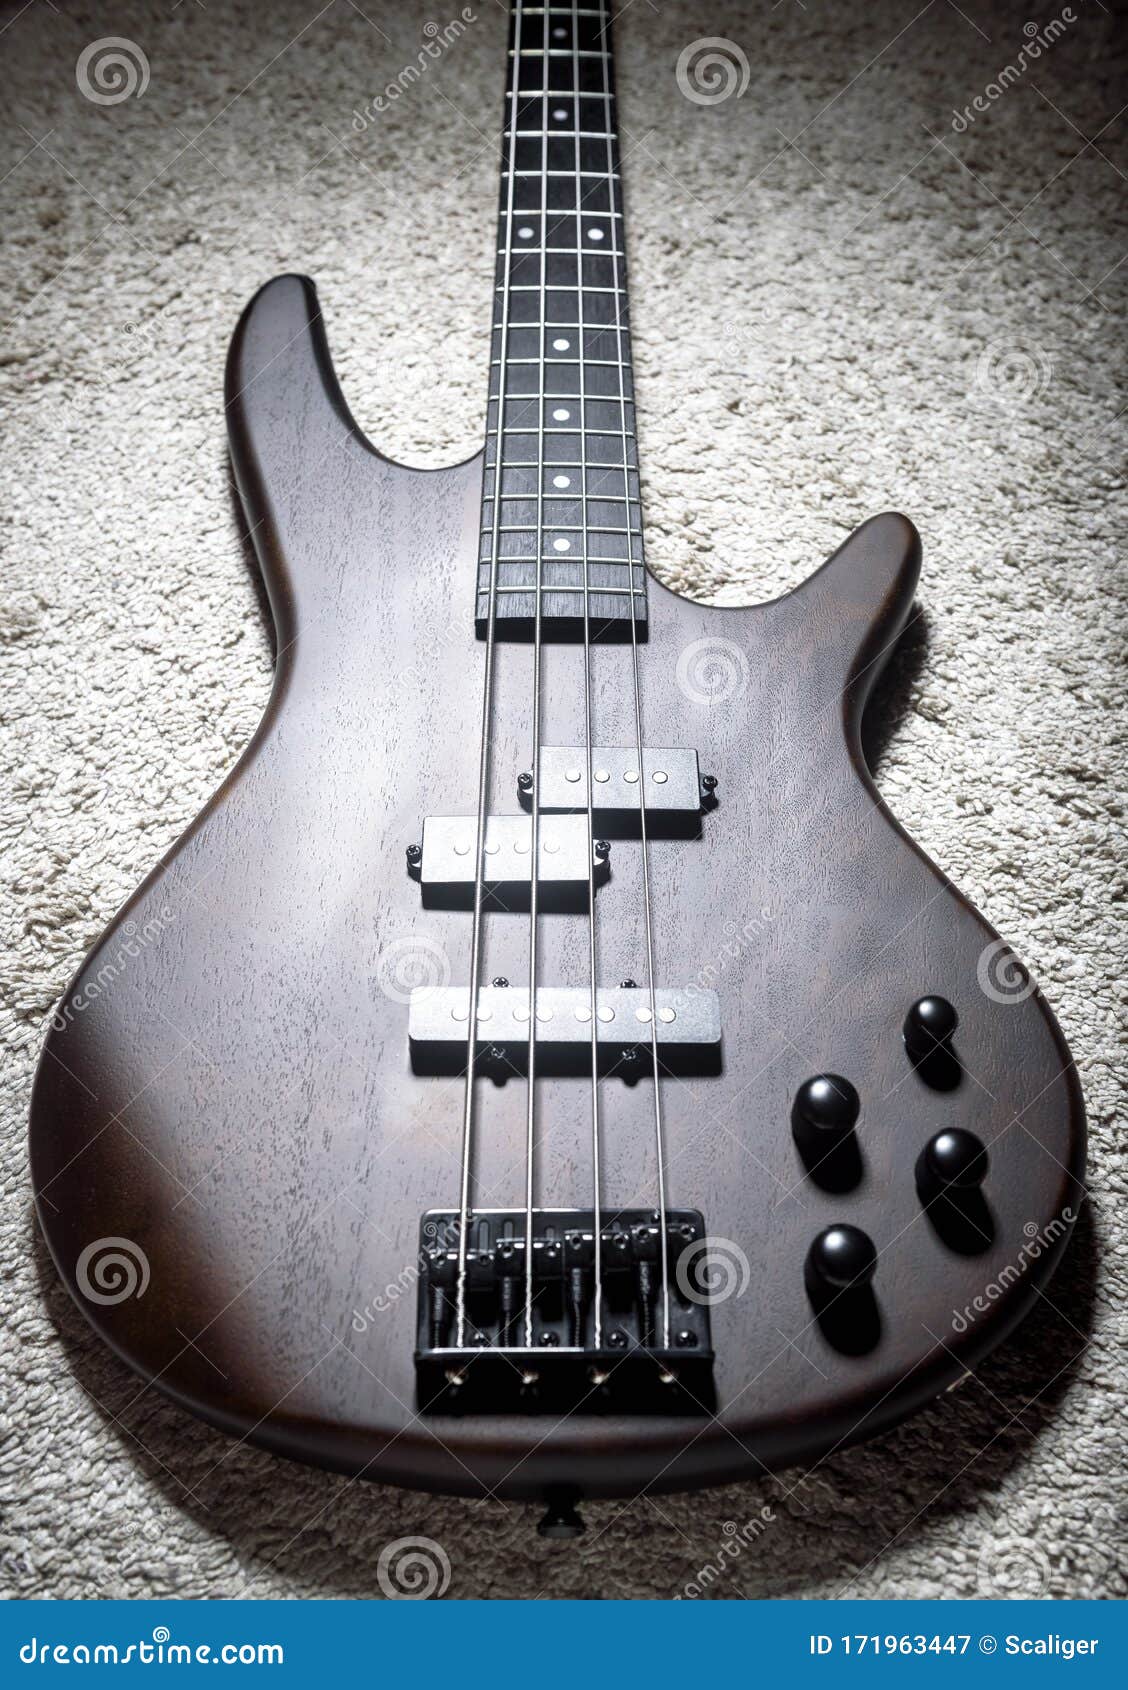 bass electric guitar with four strings. popular rock musical instrument. top view of brown bass on carpet